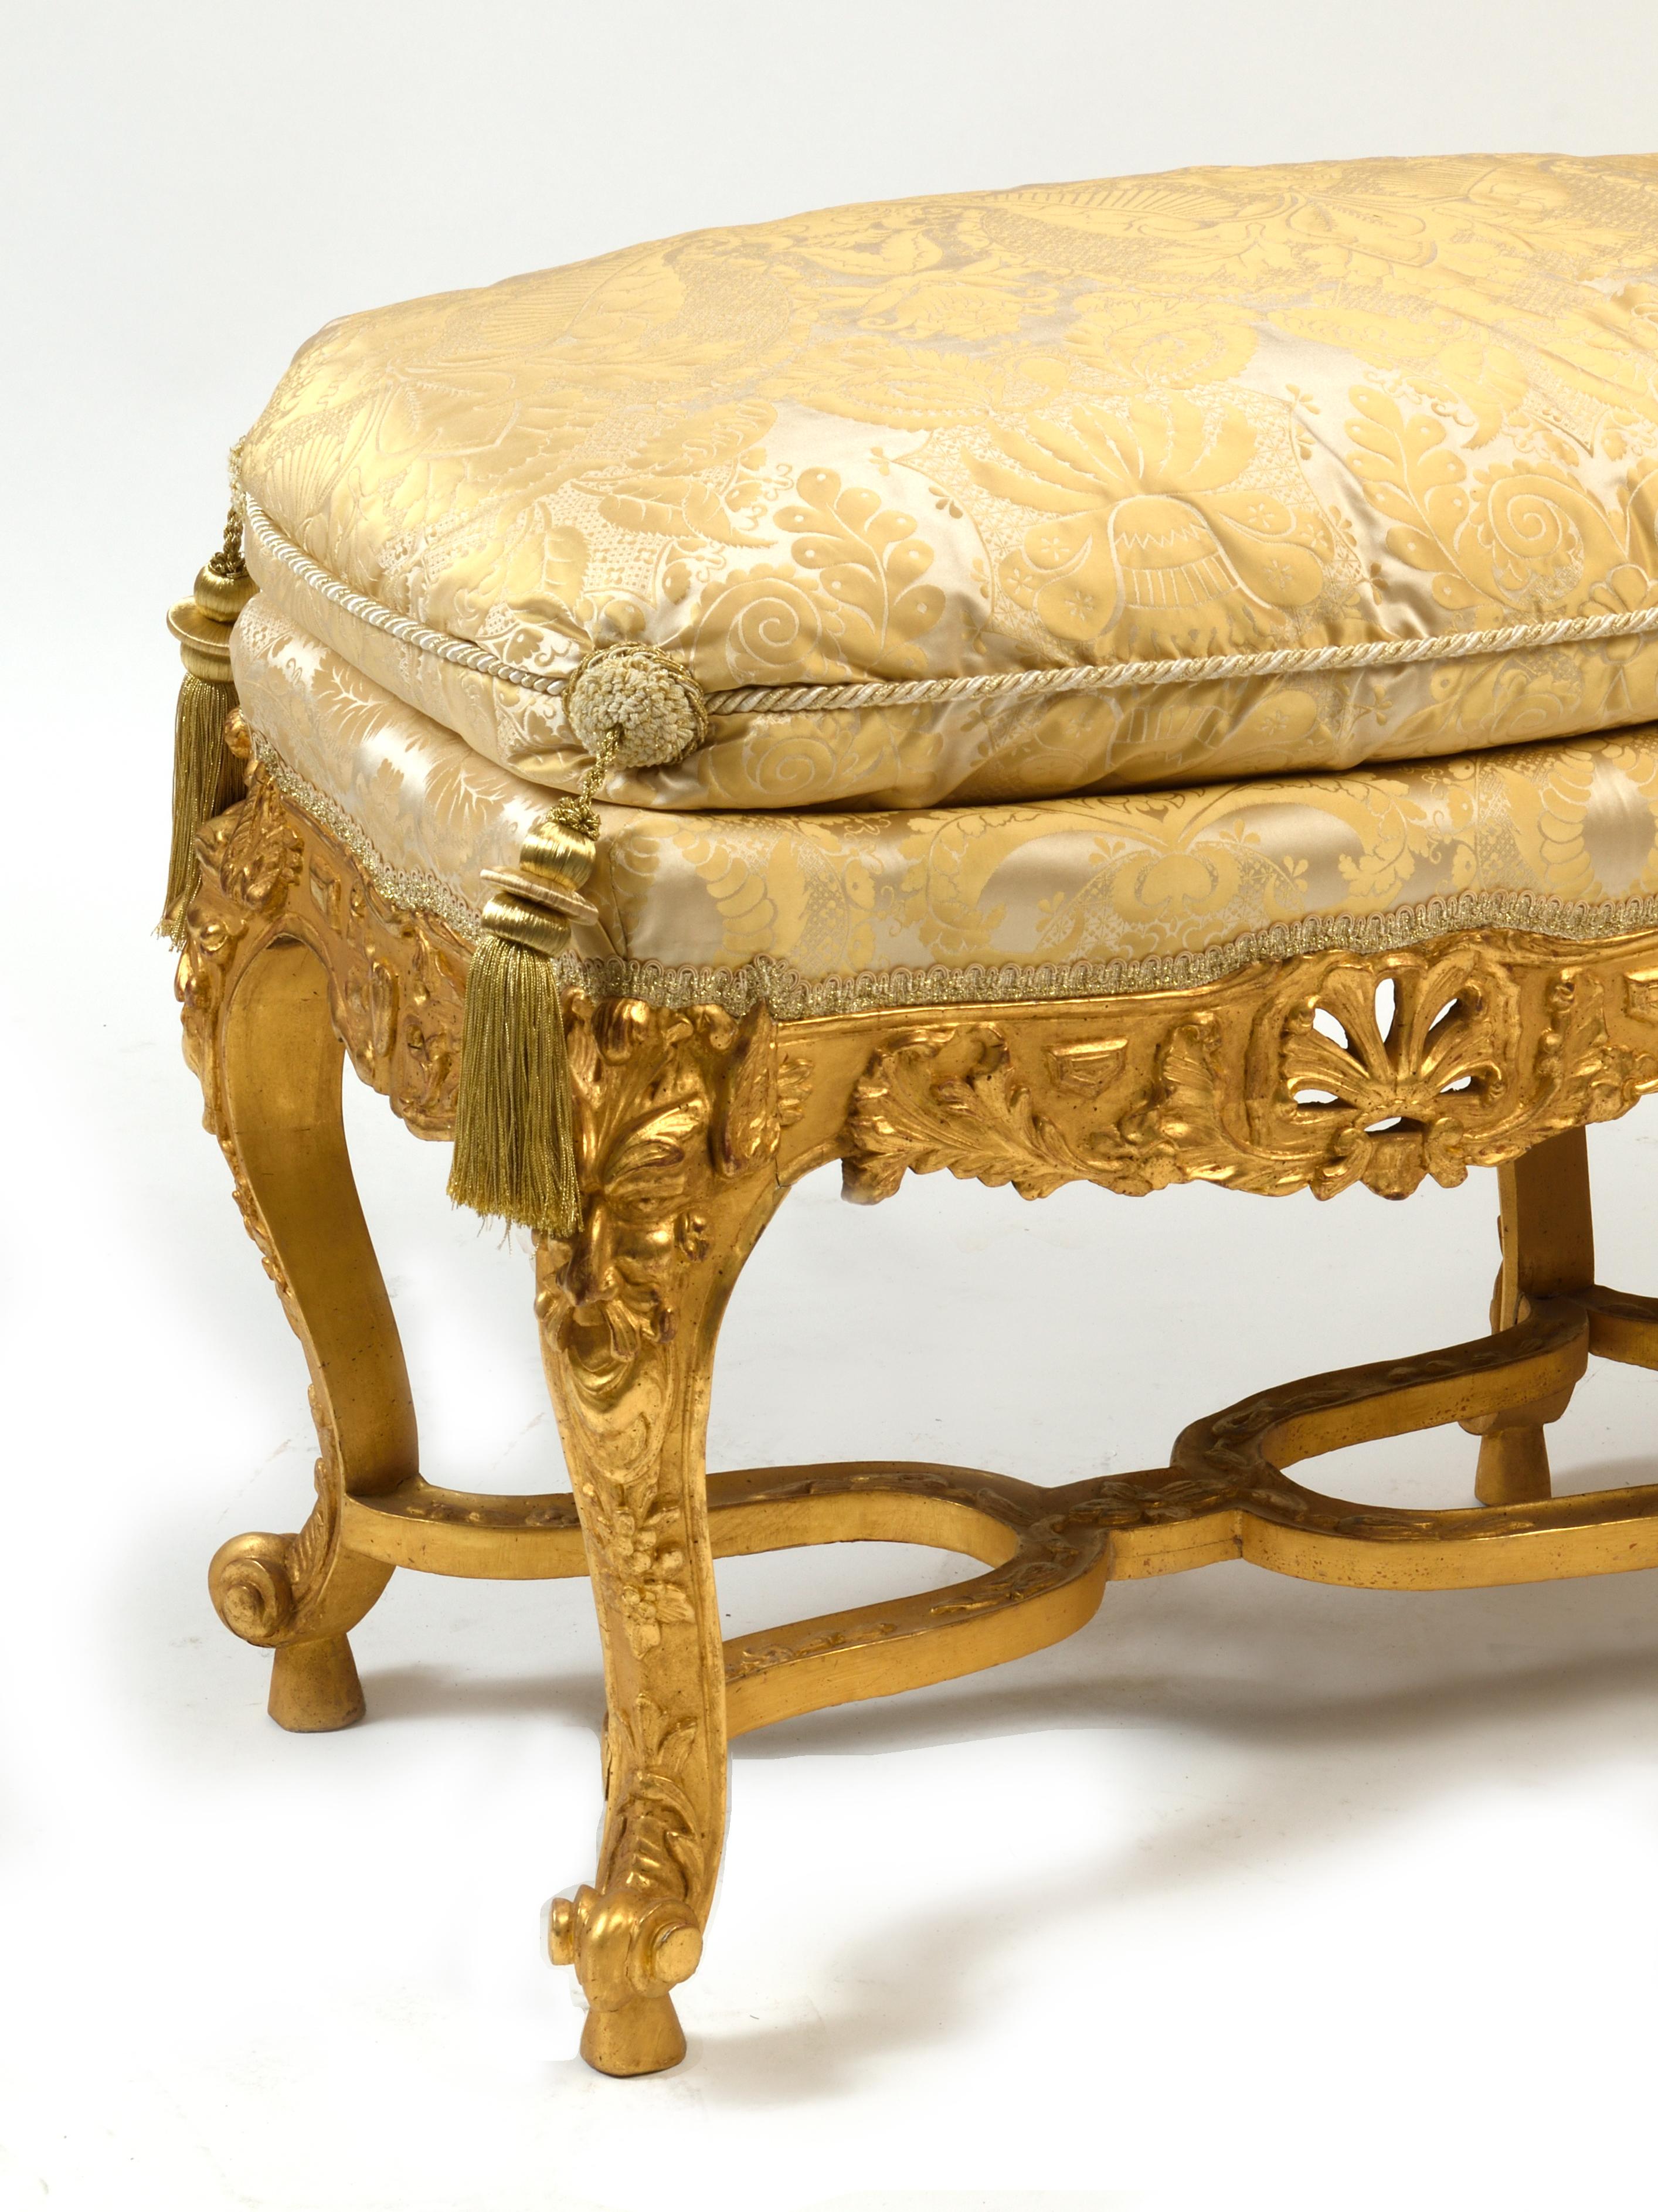 Magnificent regence style giltwood, exeptional carved wood the fabric is silk and coming from the famous silkerie in LYON france who specialise in silk fabric since the 18th century. and export all over the world